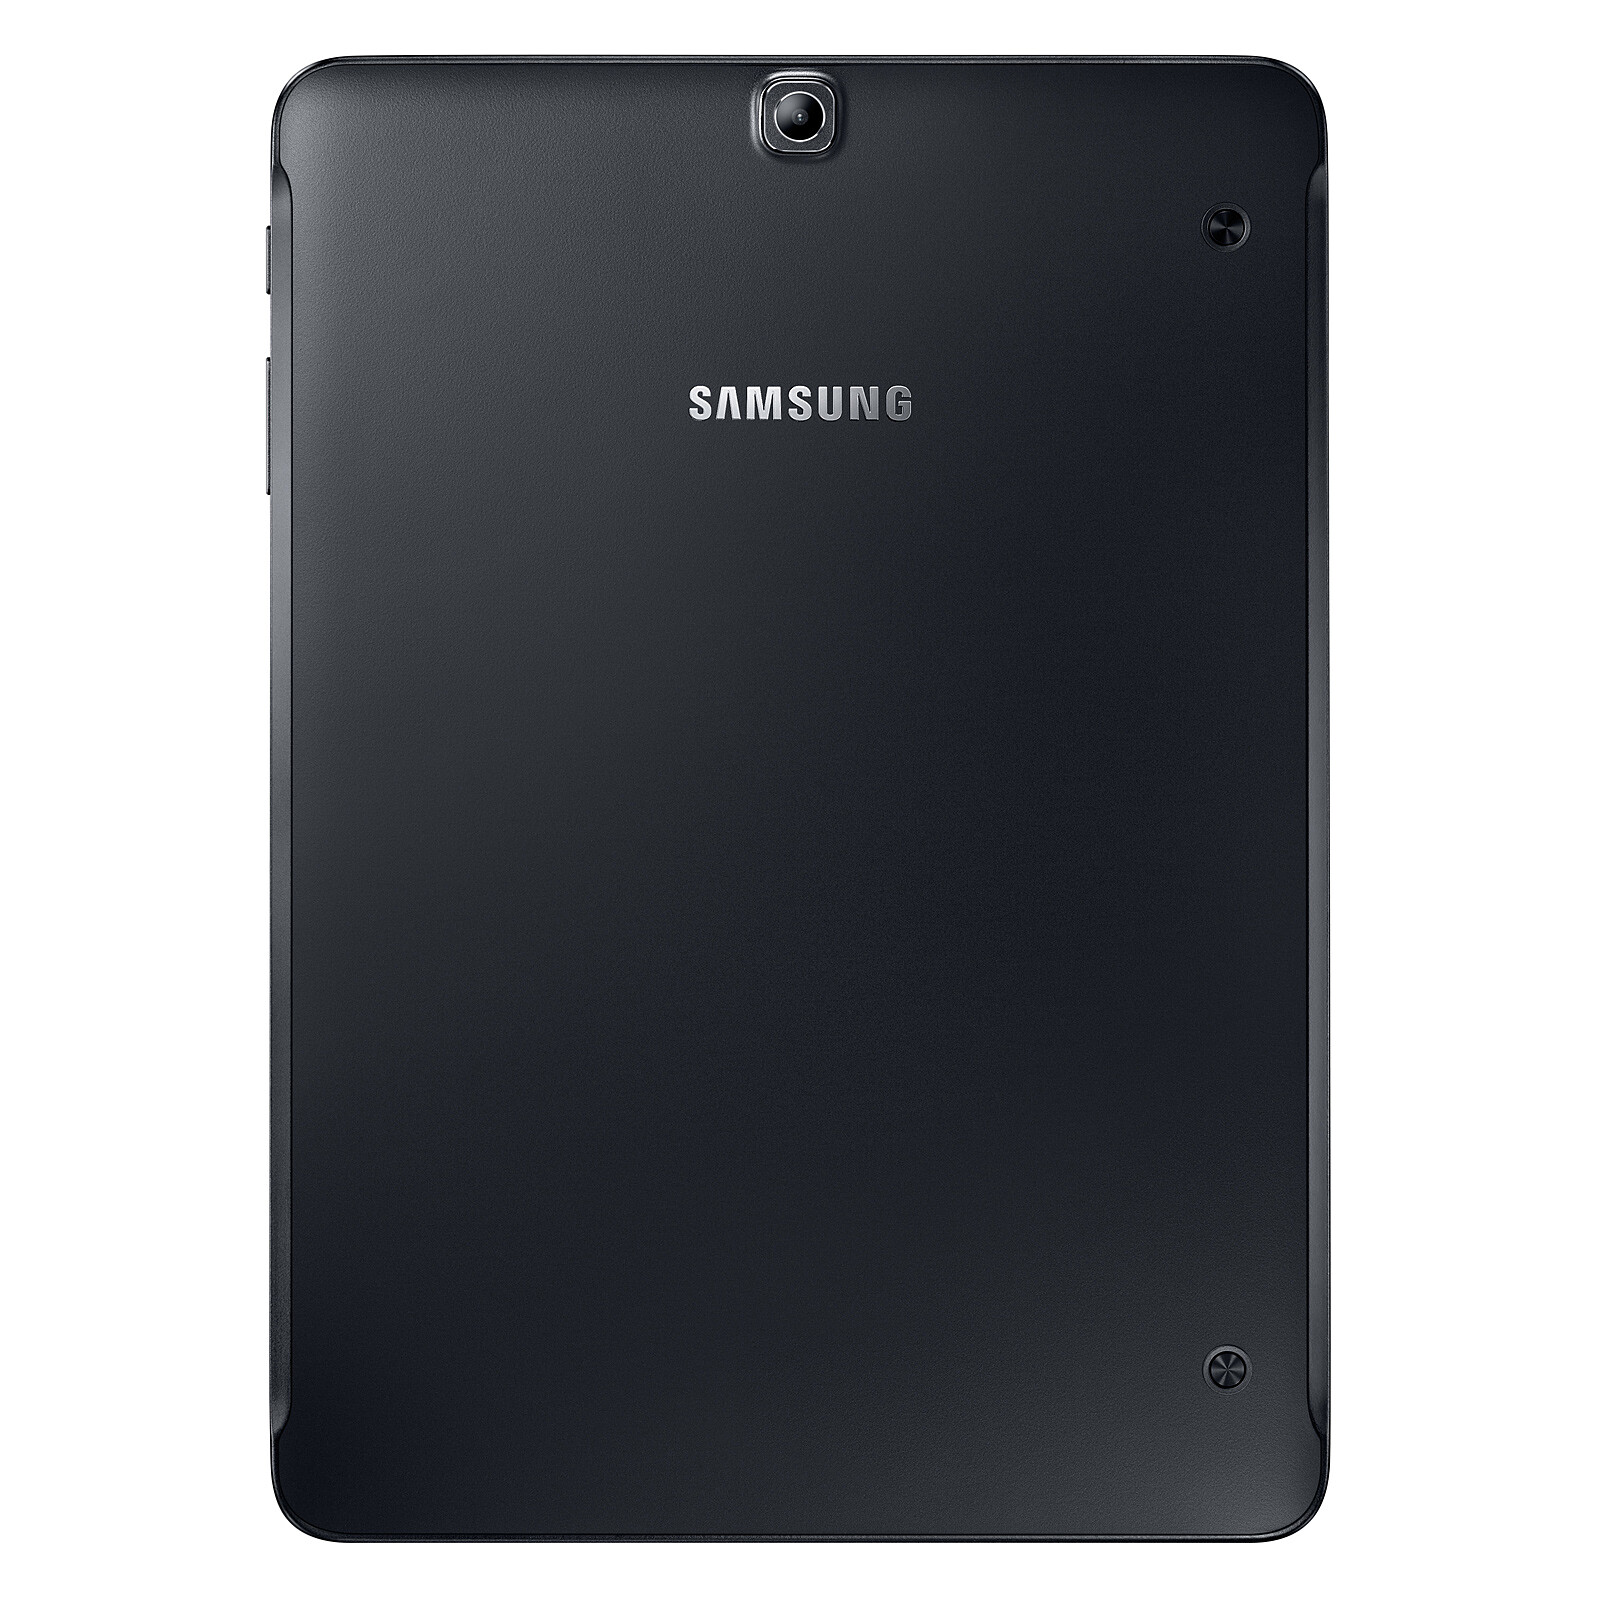 SAMSUNG Galaxy Tab S2 Wifi 32Go 4G 9,7'' blanche - Tablette tactile Pas Cher